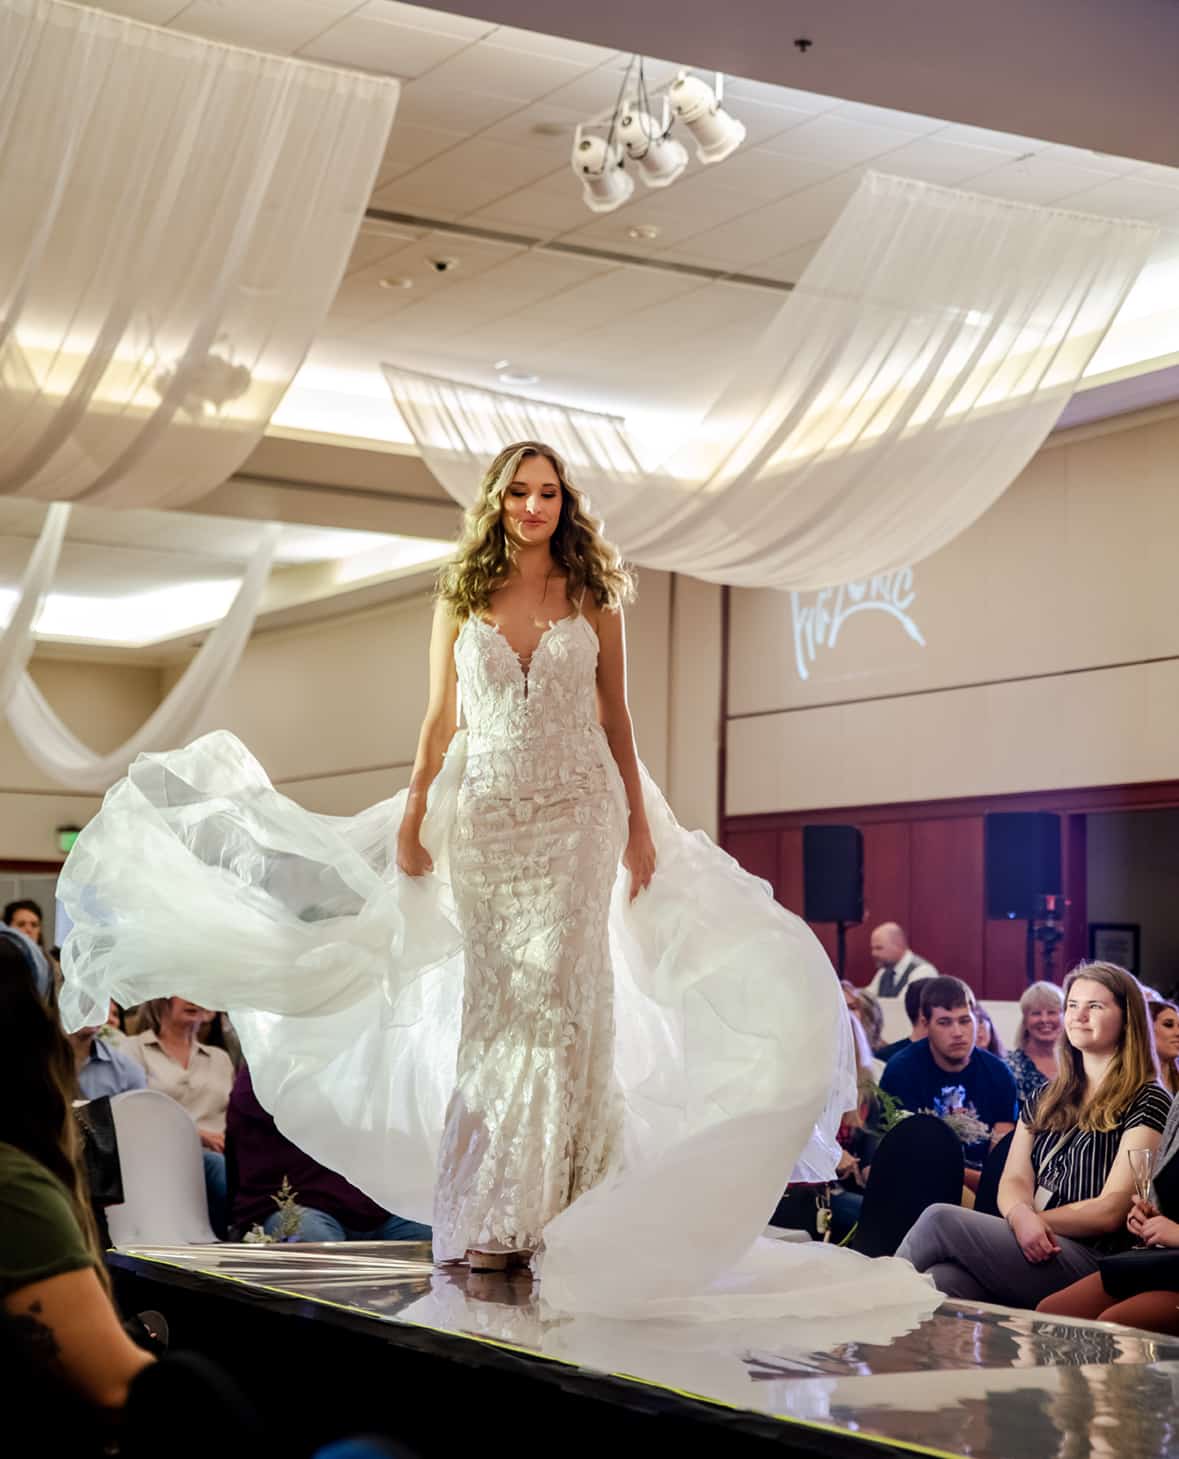 Fashion show of bridal gown at WV's Premier Wedding Expo